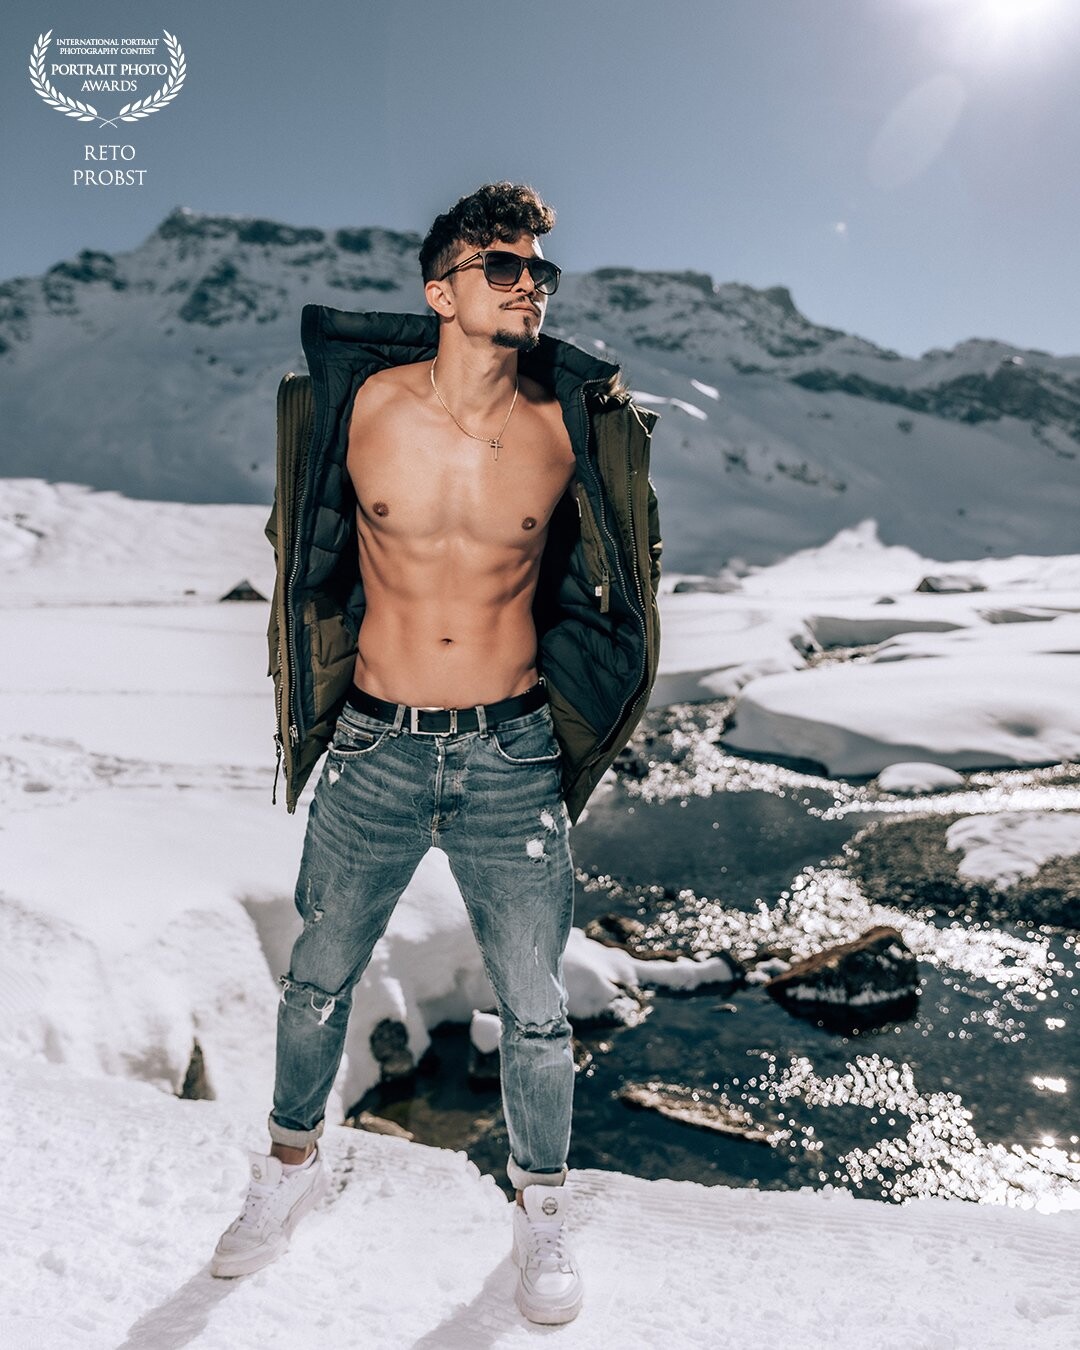 On a cloudless day in the beautiful Swiss Alps, Thiemo once again showed his modeling potential. The meltwater in the snow-covered landscape makes the mood in the picture extraordinary.